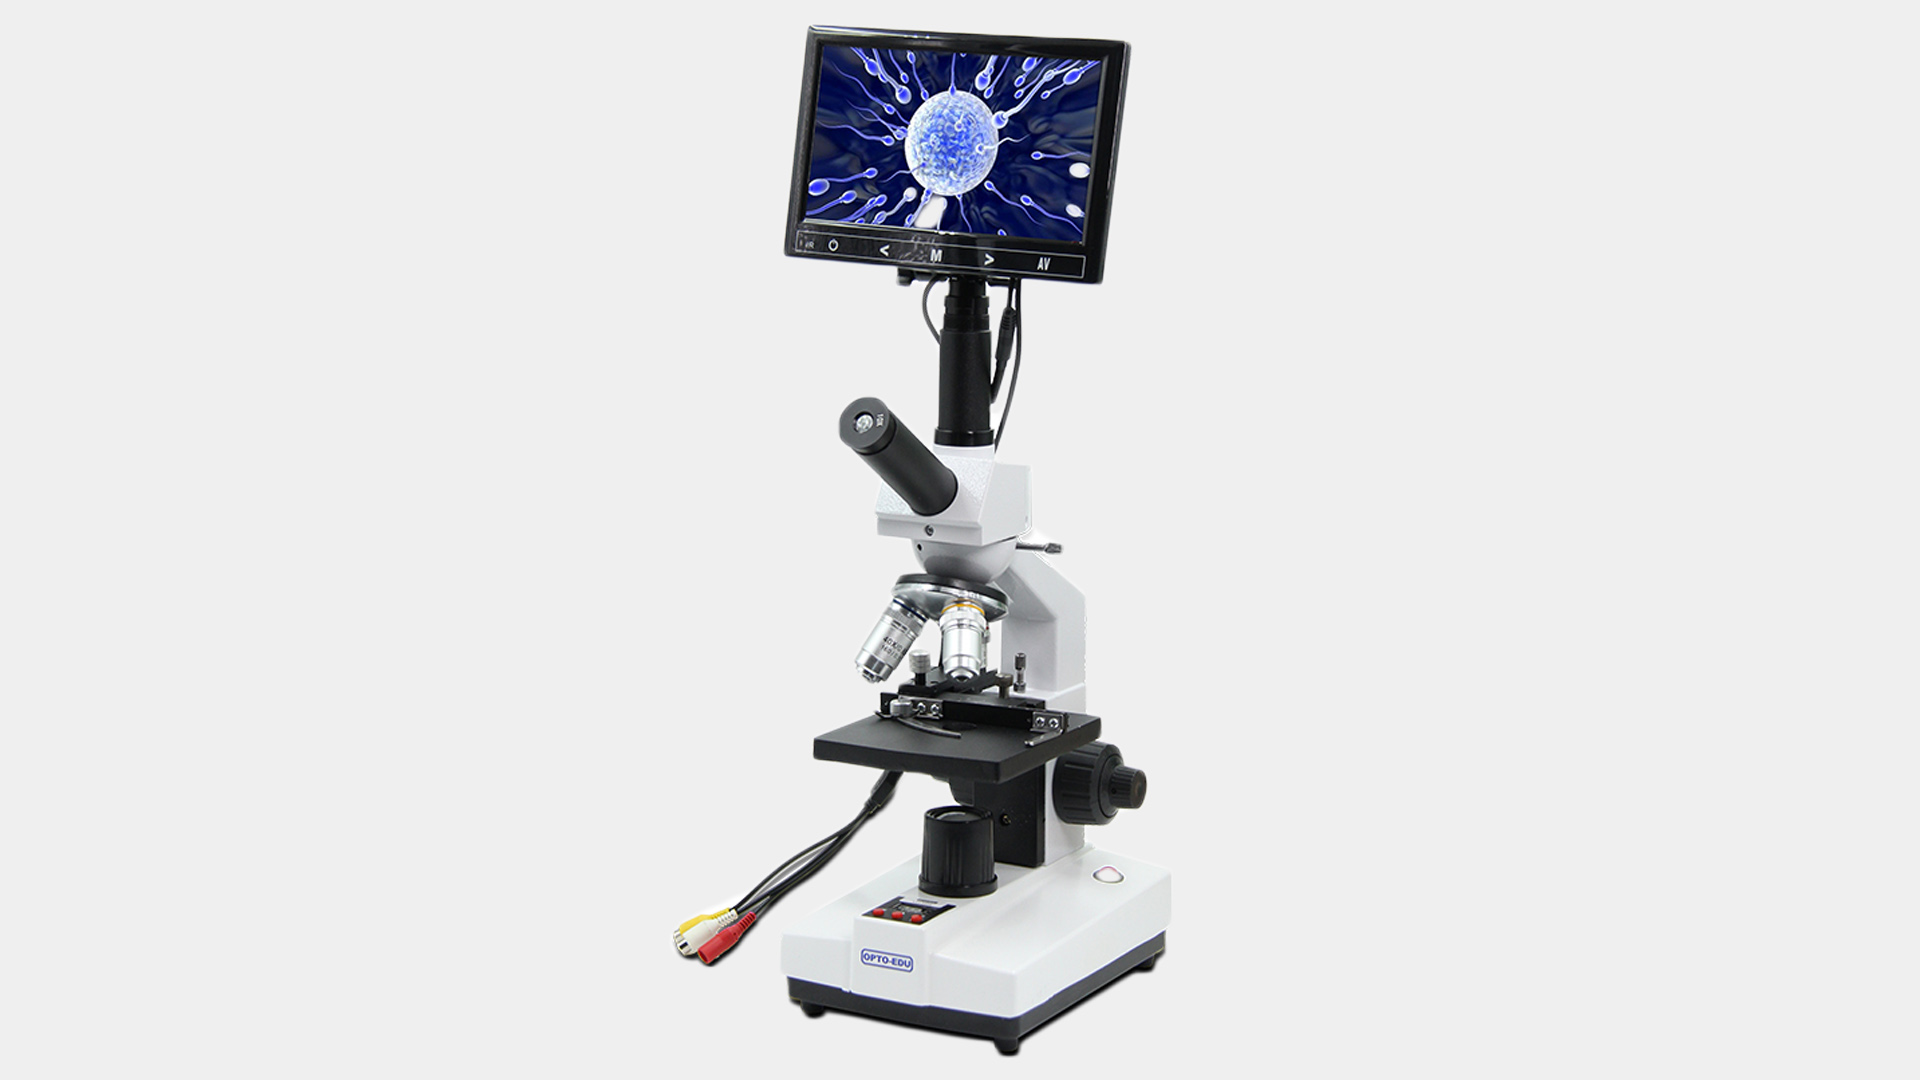 A33.5101 7" LCD Digital Heating Stage Biological Microscope